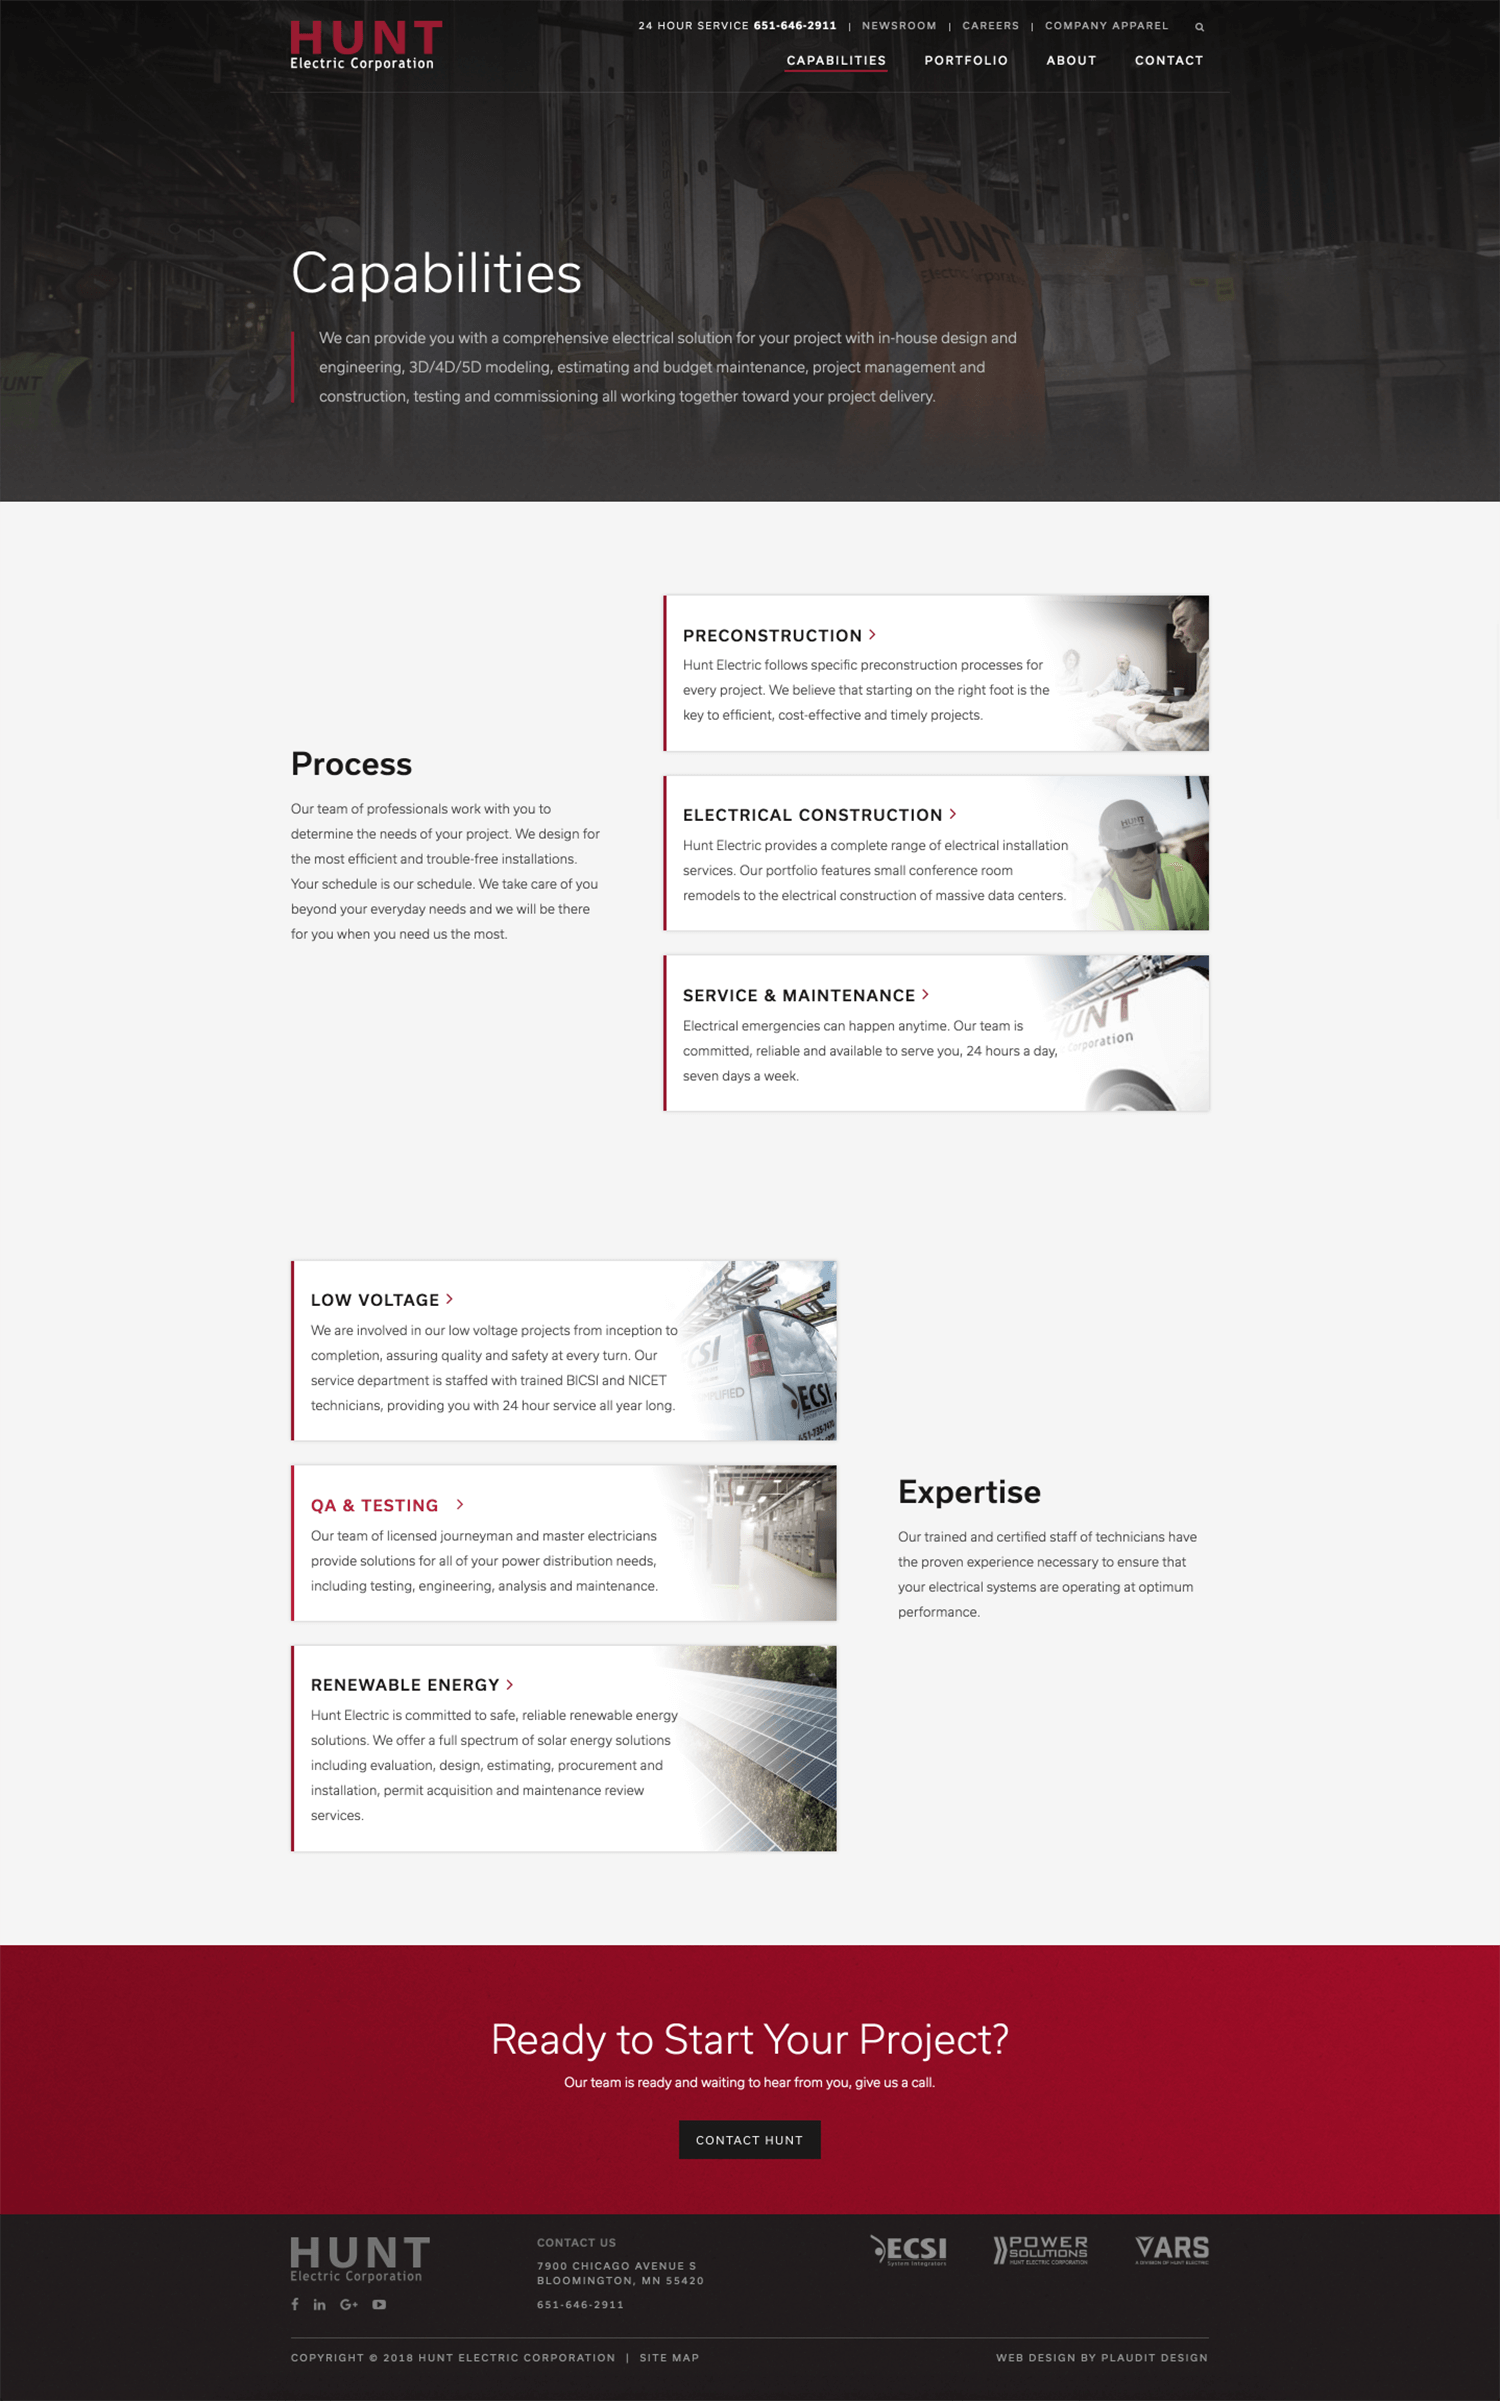 Full Image of Studio Eight’s Creative Services Page.